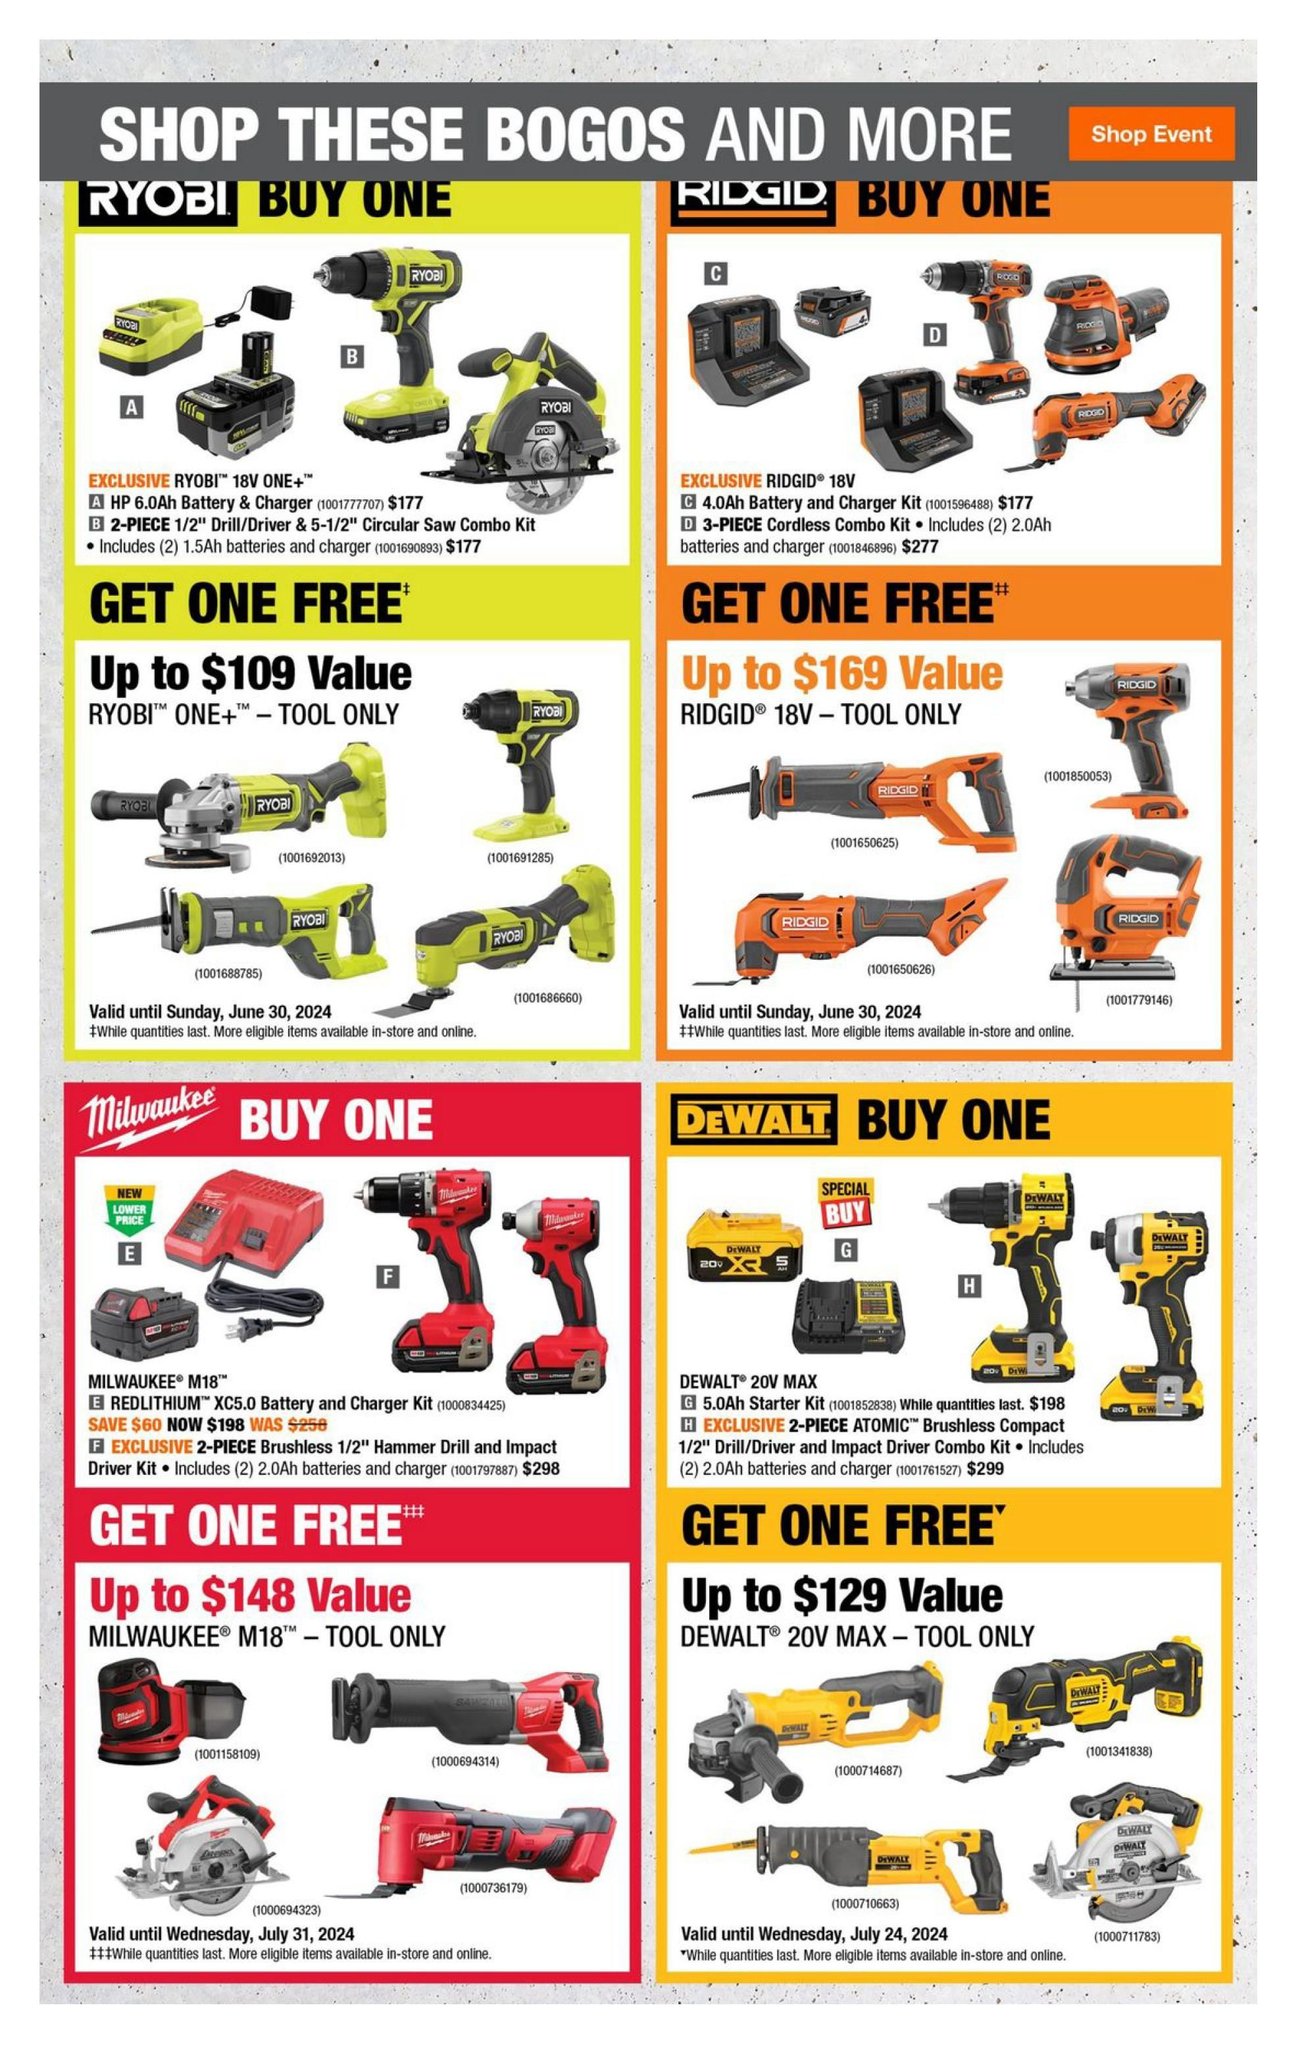 Home Depot - Father's Day Gift Guide - Page 3